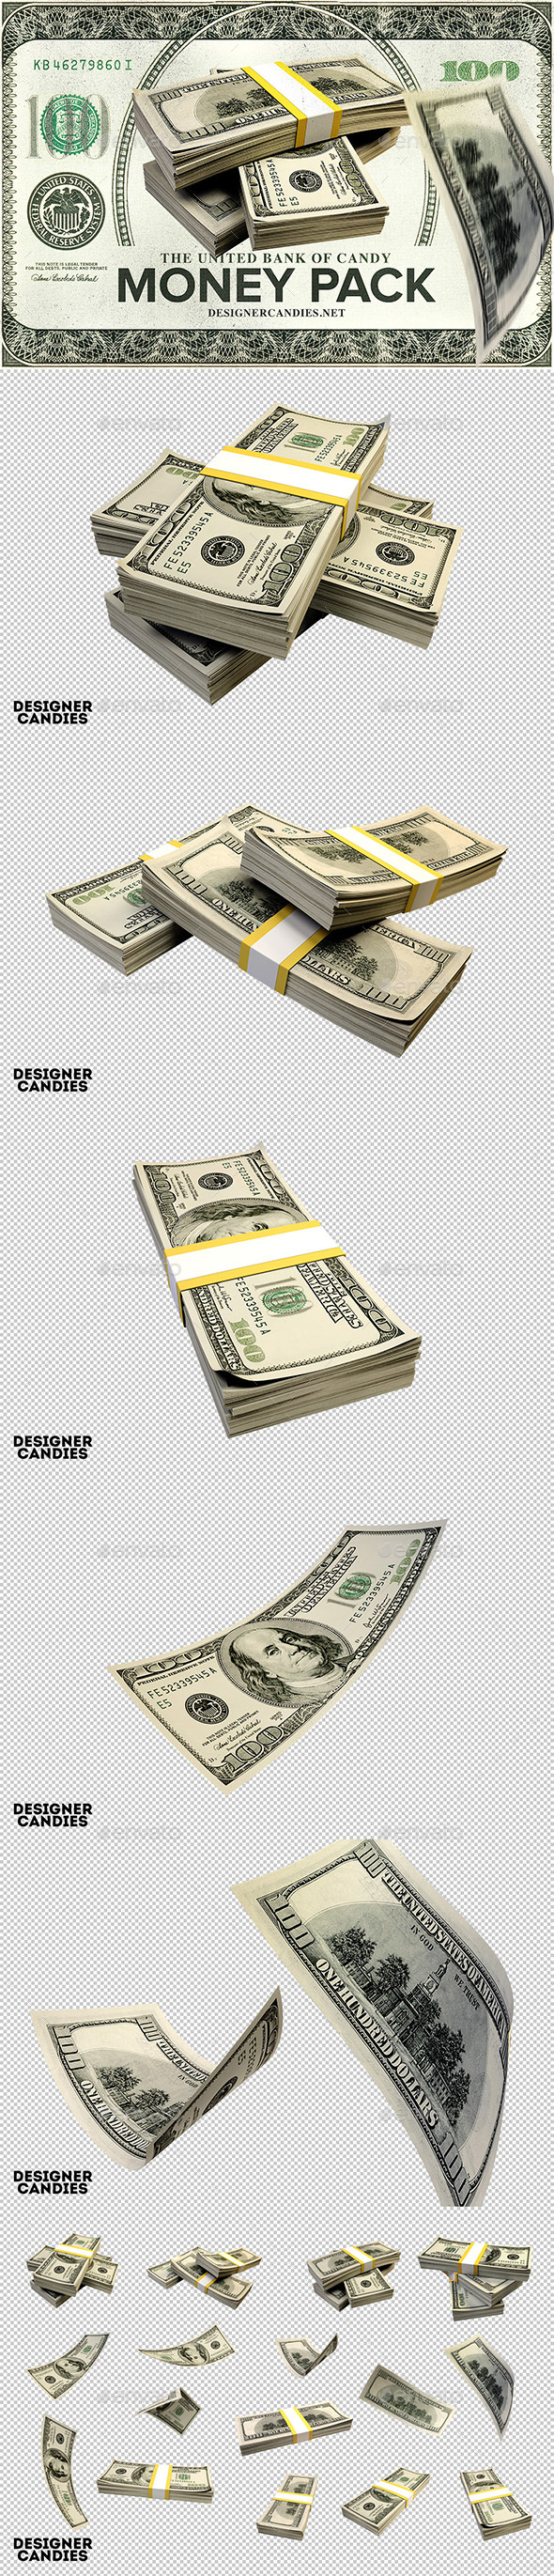 Download 3d Money Stacks Falling Money By Dcandies Graphicriver